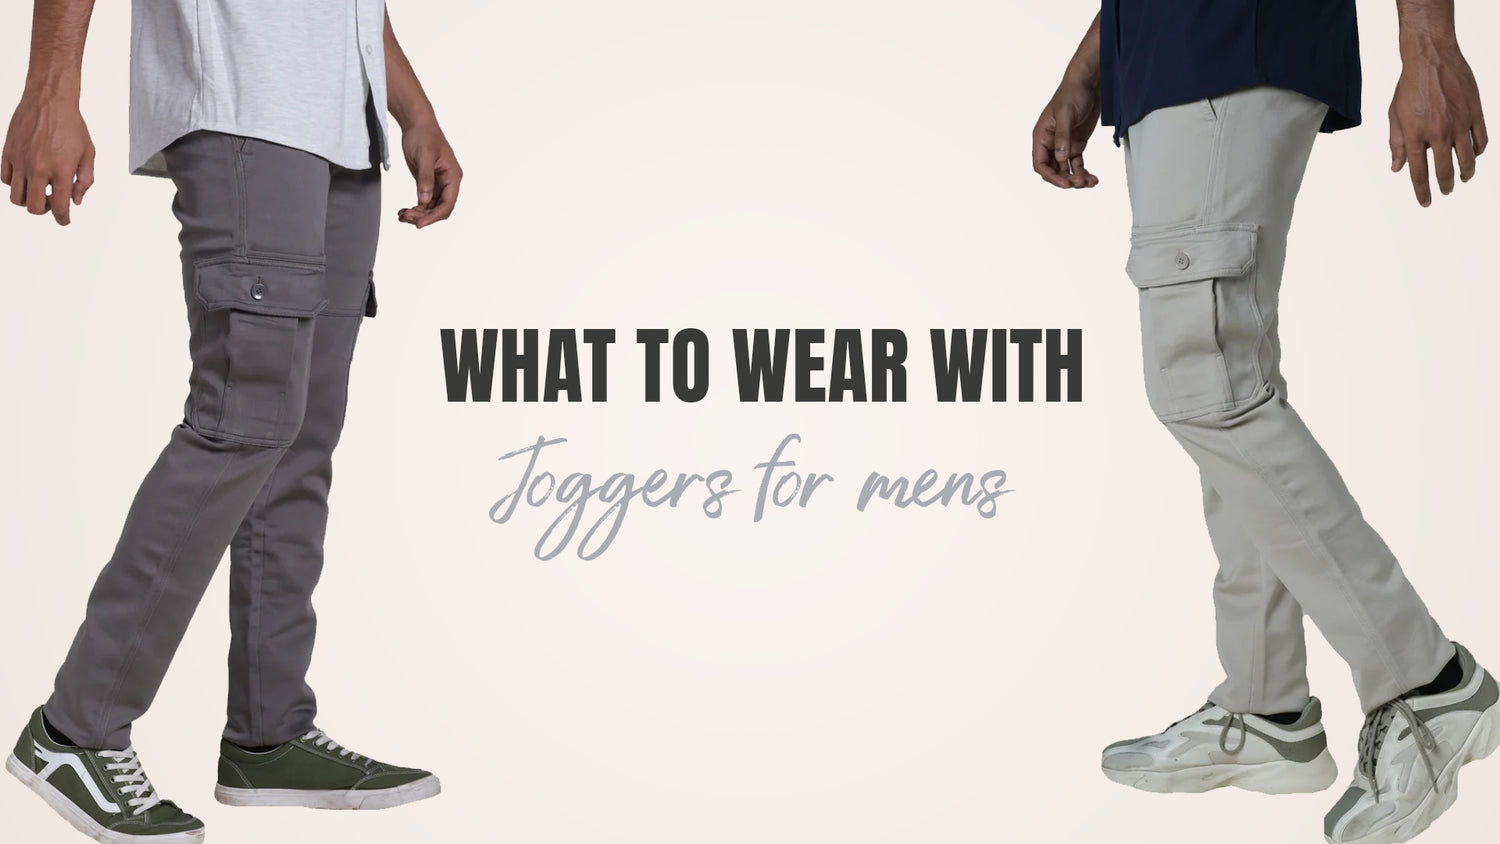 Alternative trousers to wear instead of jeans